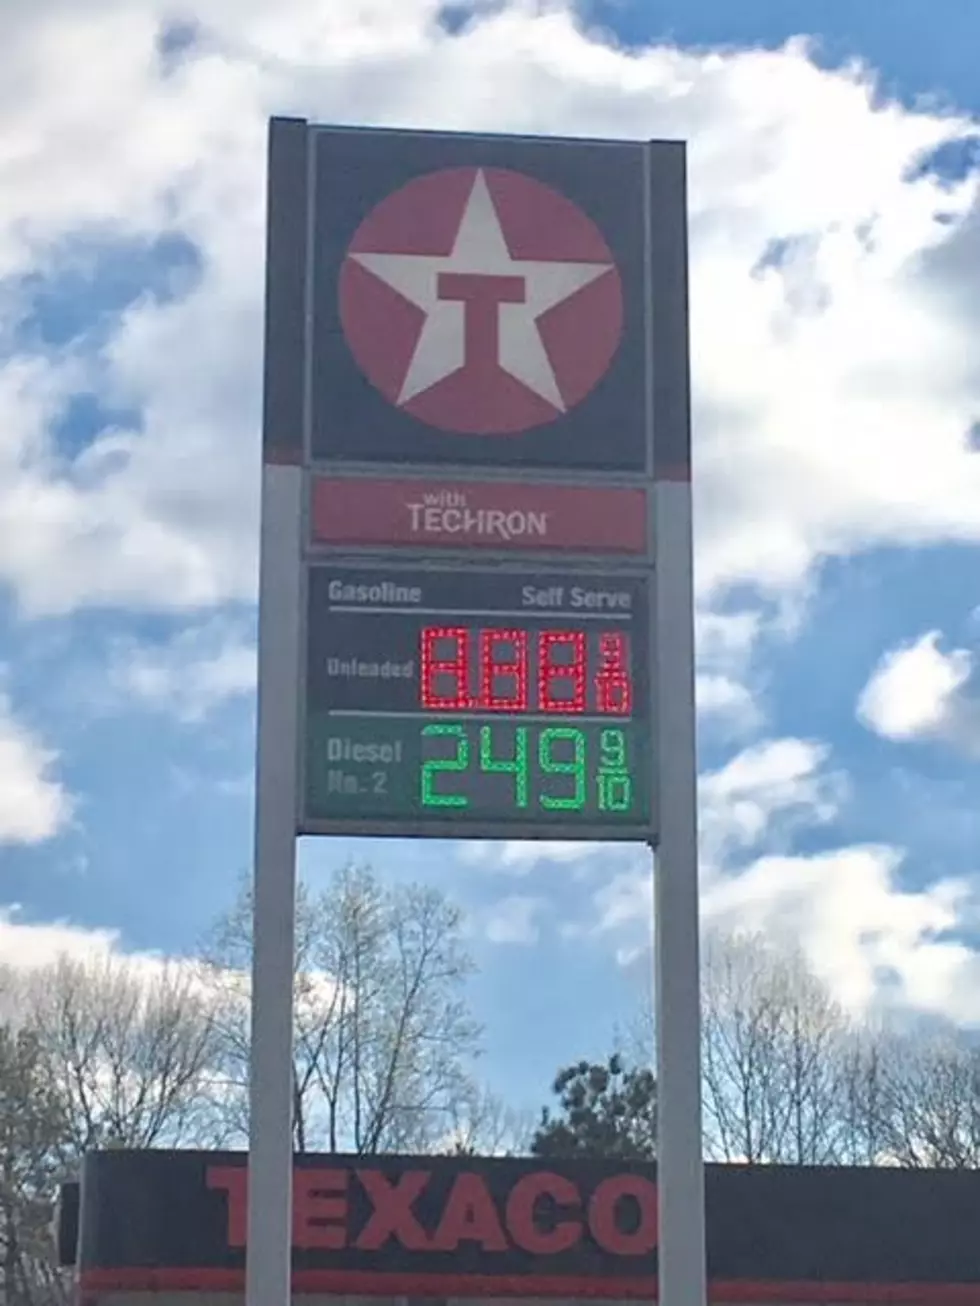 Gas Prices To Hit $9.00 A Gallon Soon In Tuscaloosa?!